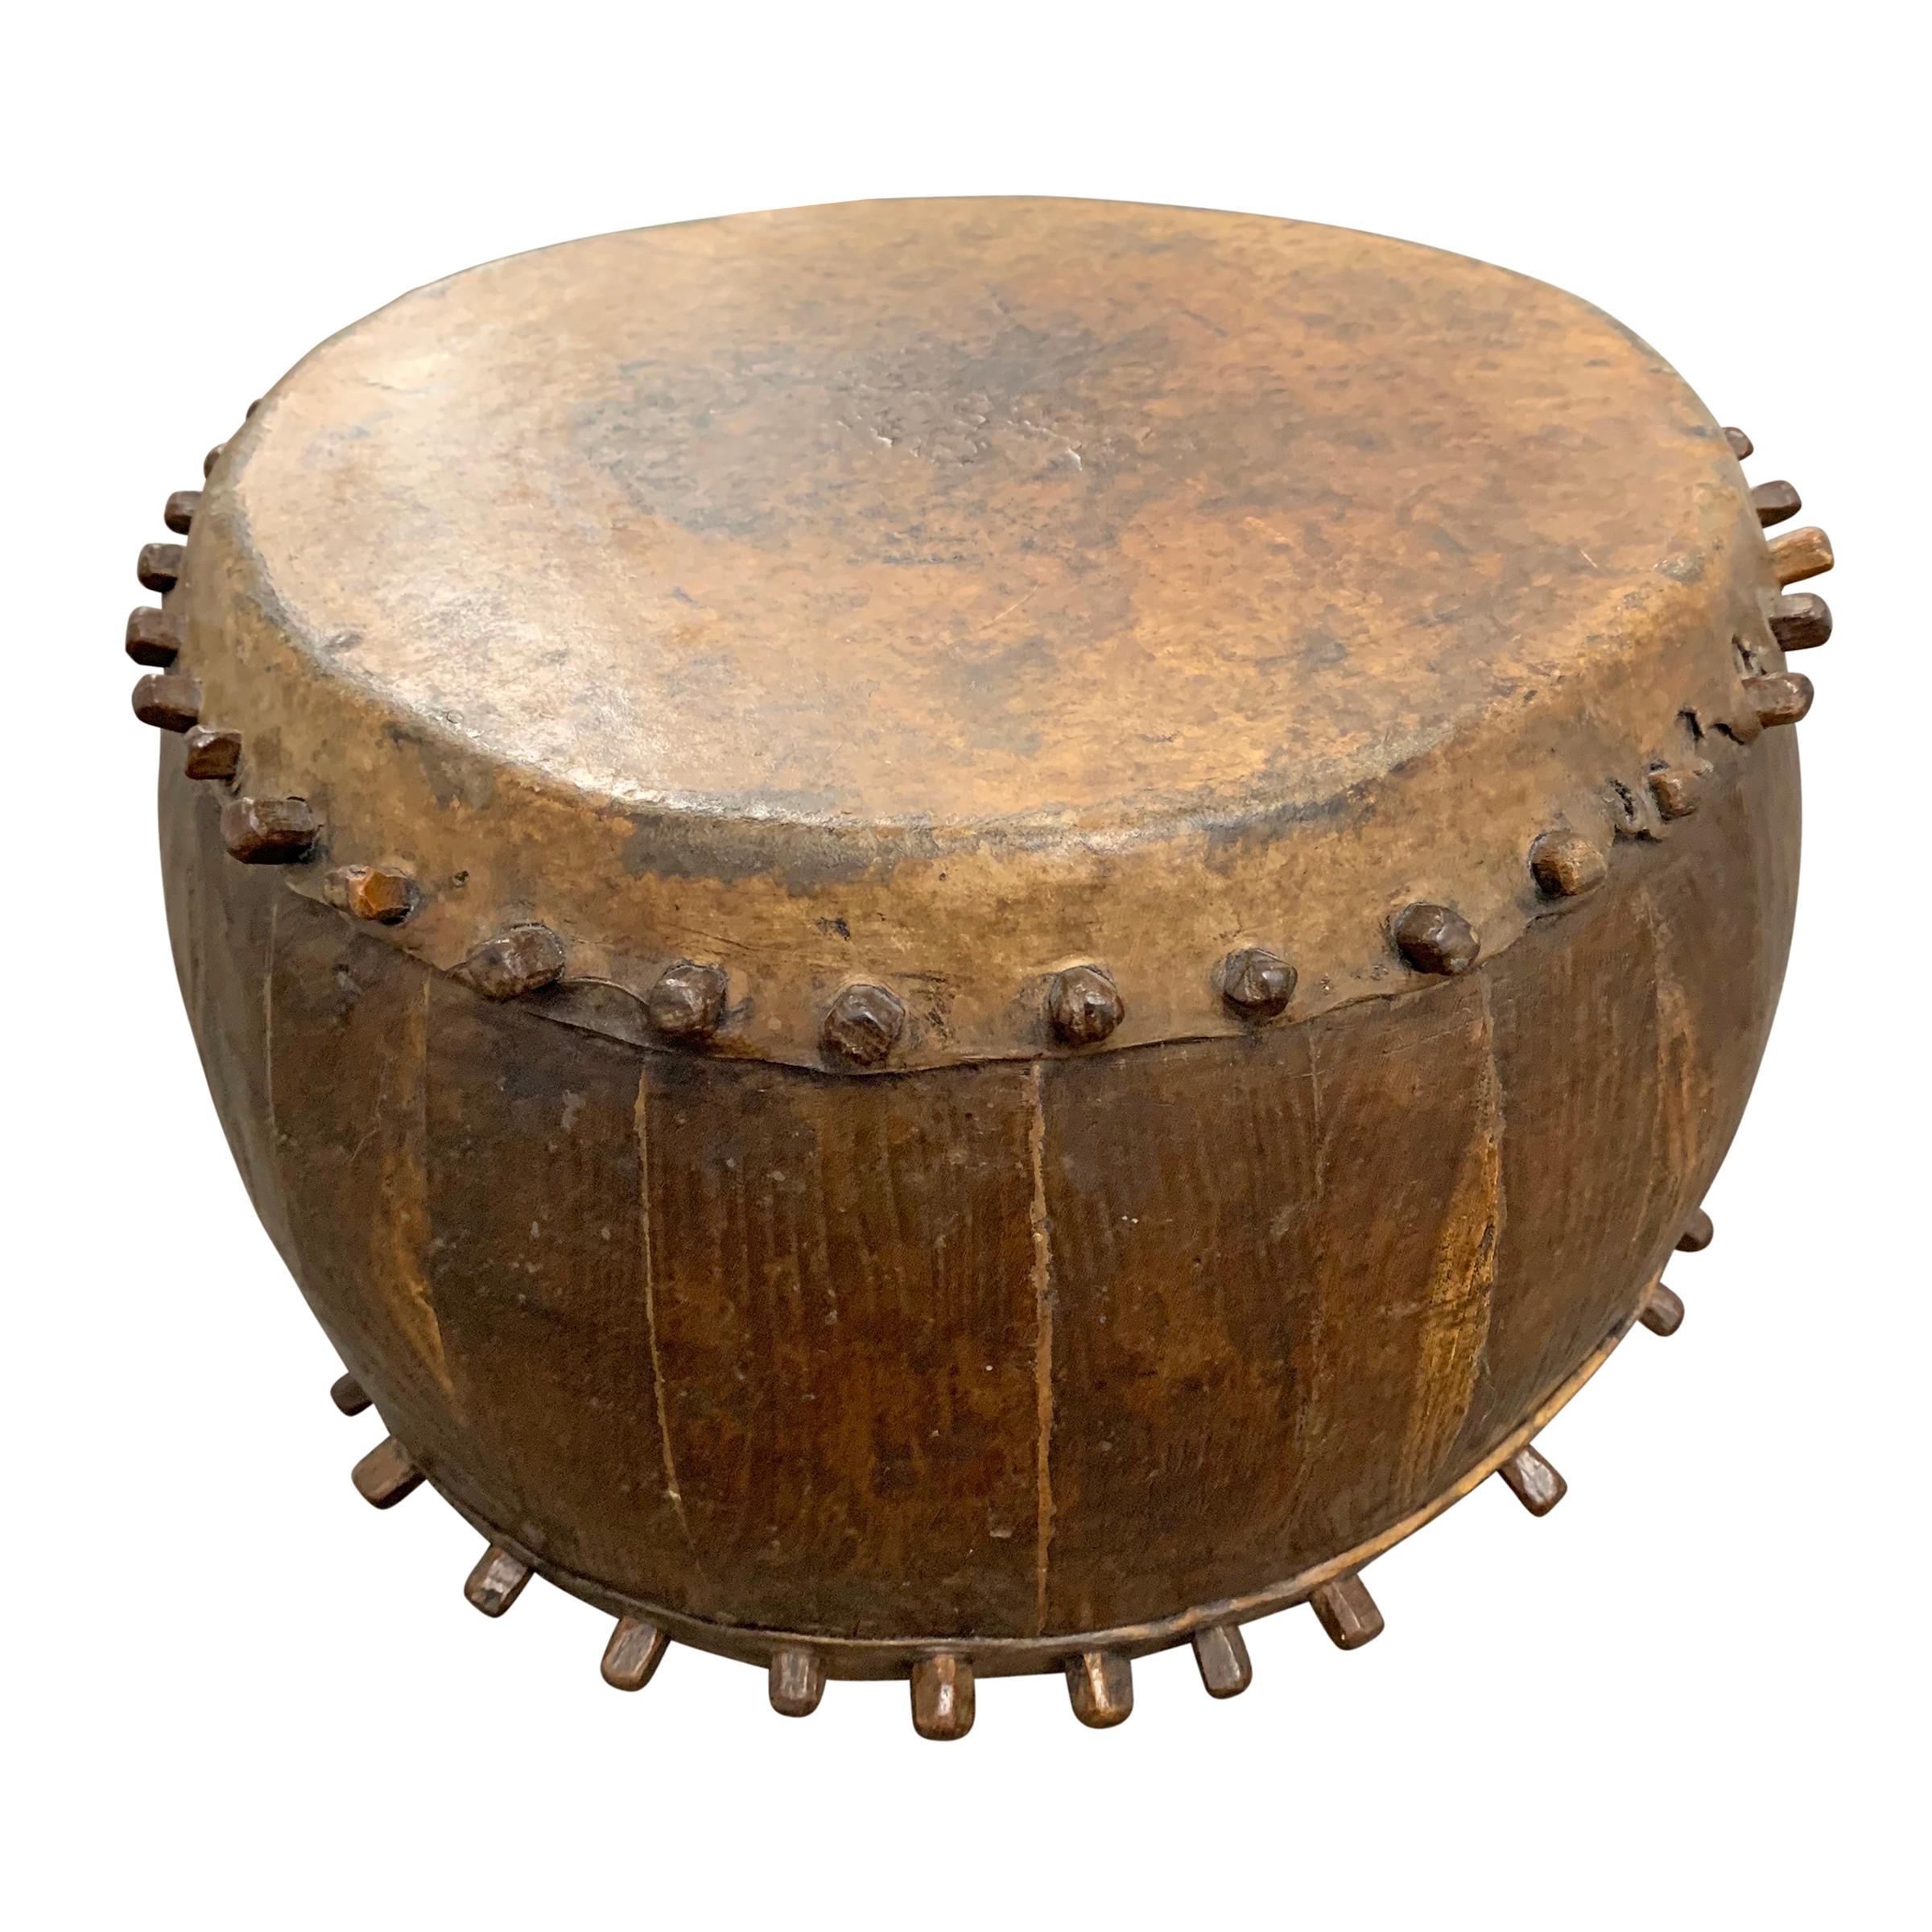 A 19th century Chinese opera drum with stretched hide drumbhead and hand carved wooden pegs to hold it in place. Perfect for use as a small drinks table or side table!